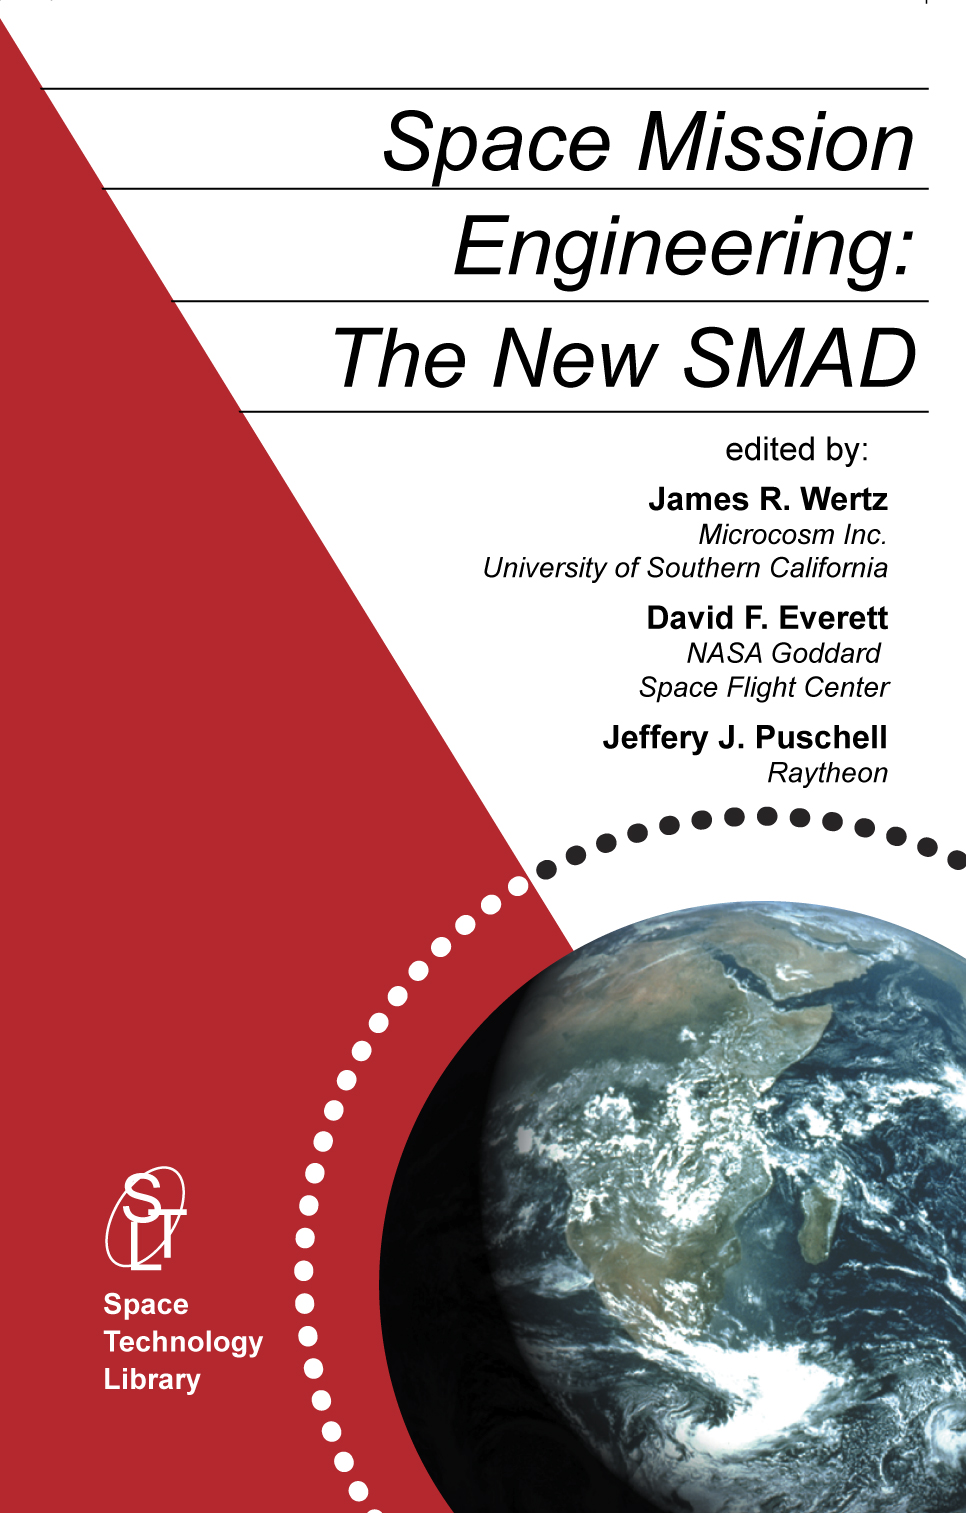 Space Mission Engineering The New SMAD Microcosm Press